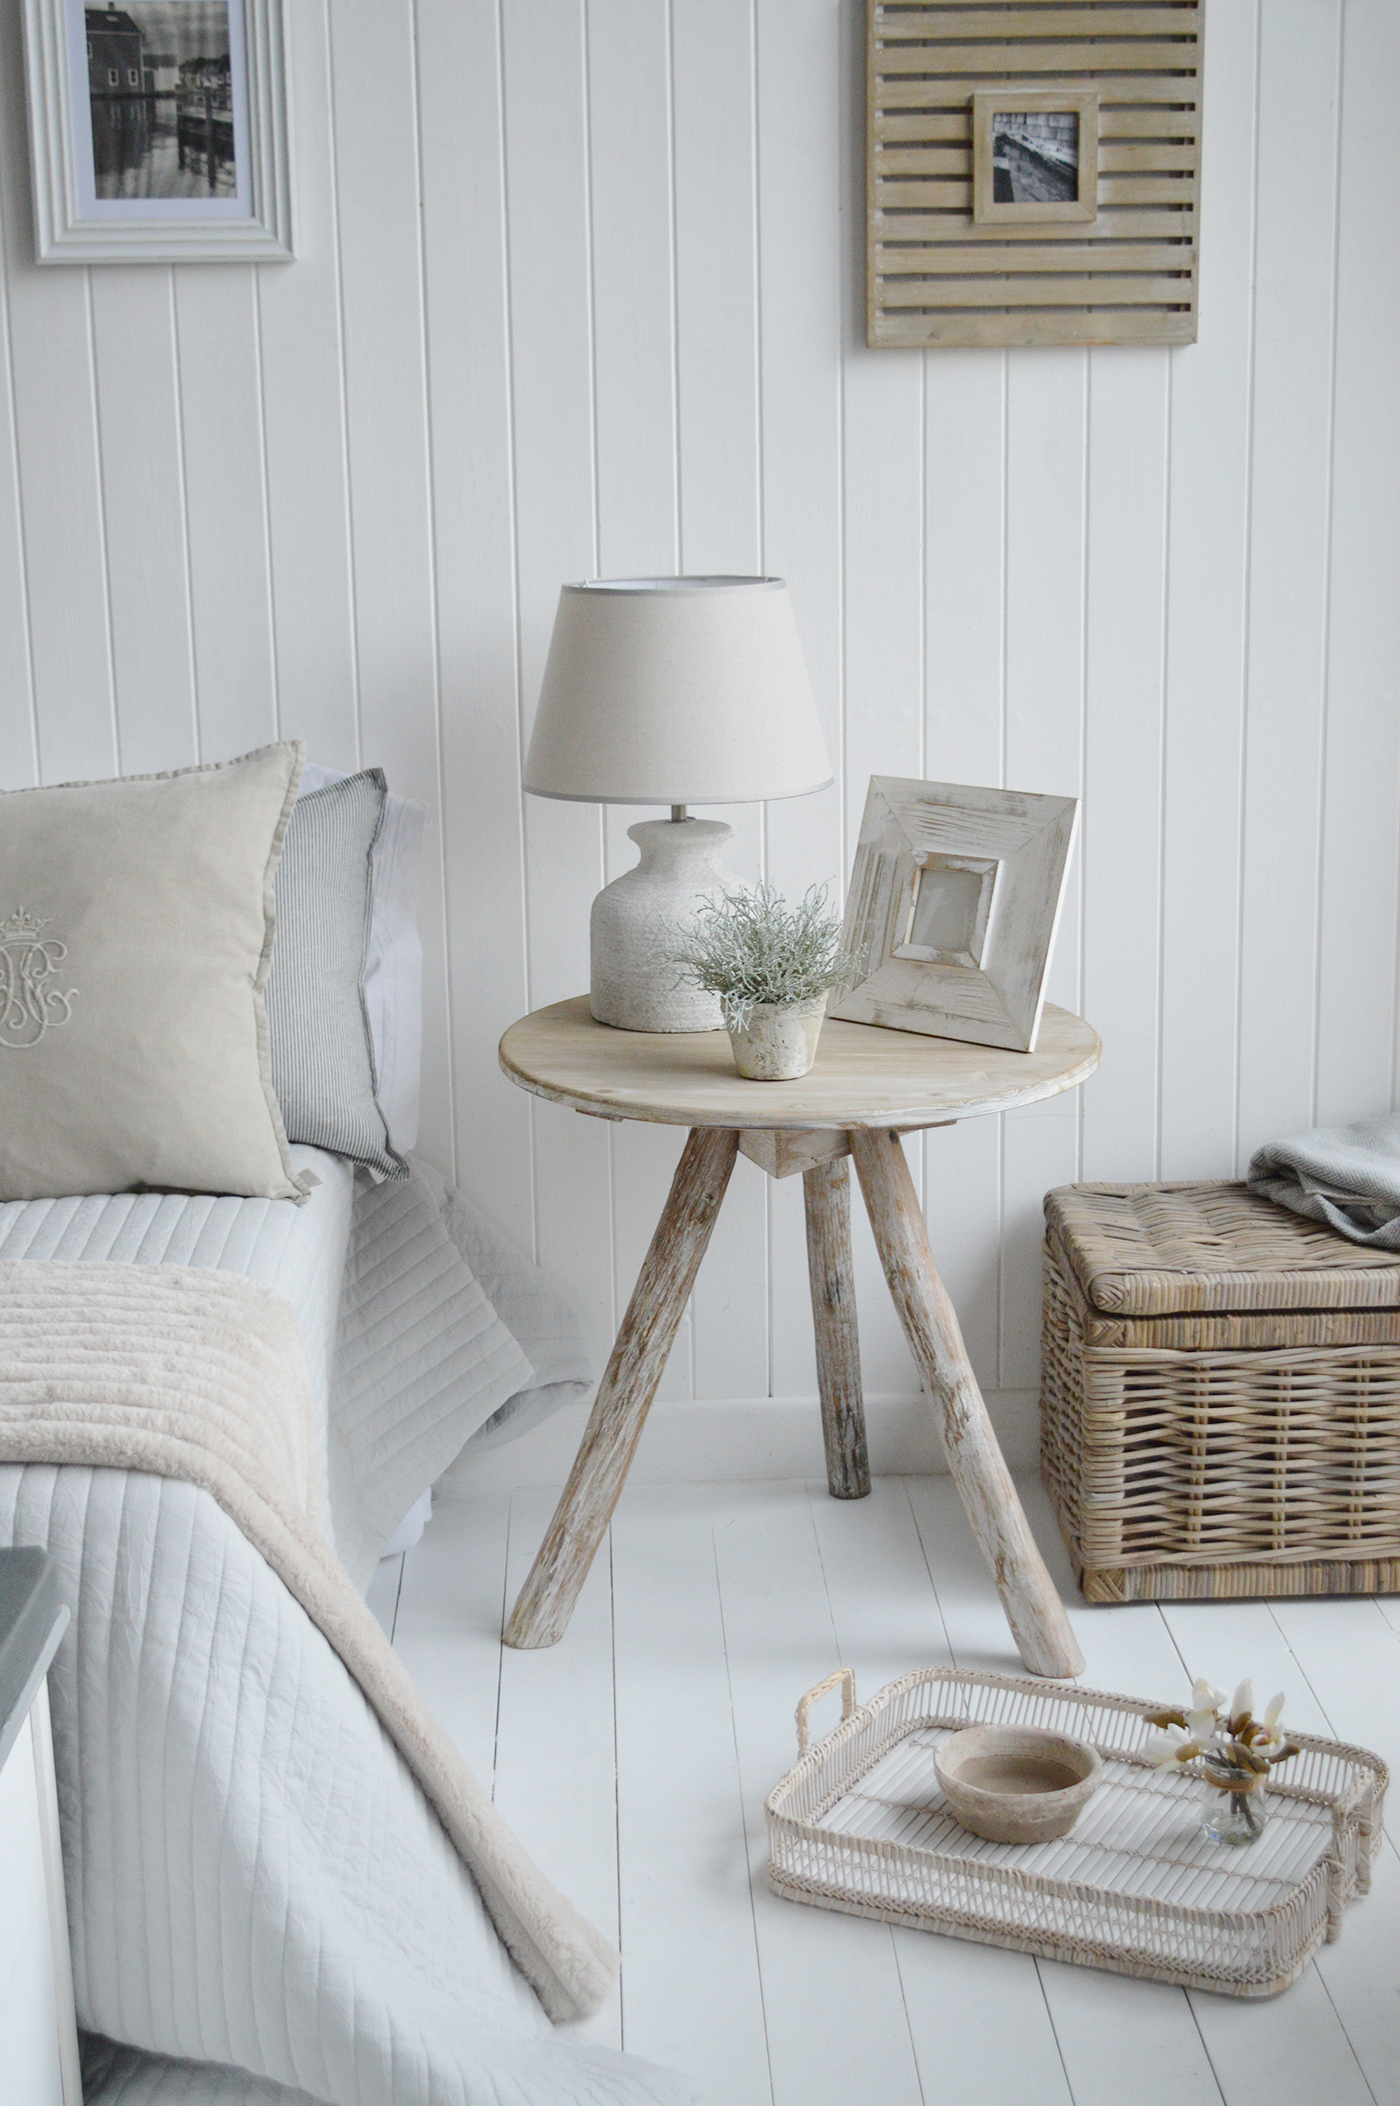 The Driftwood table as a bedside in a modern country inspired bedroom